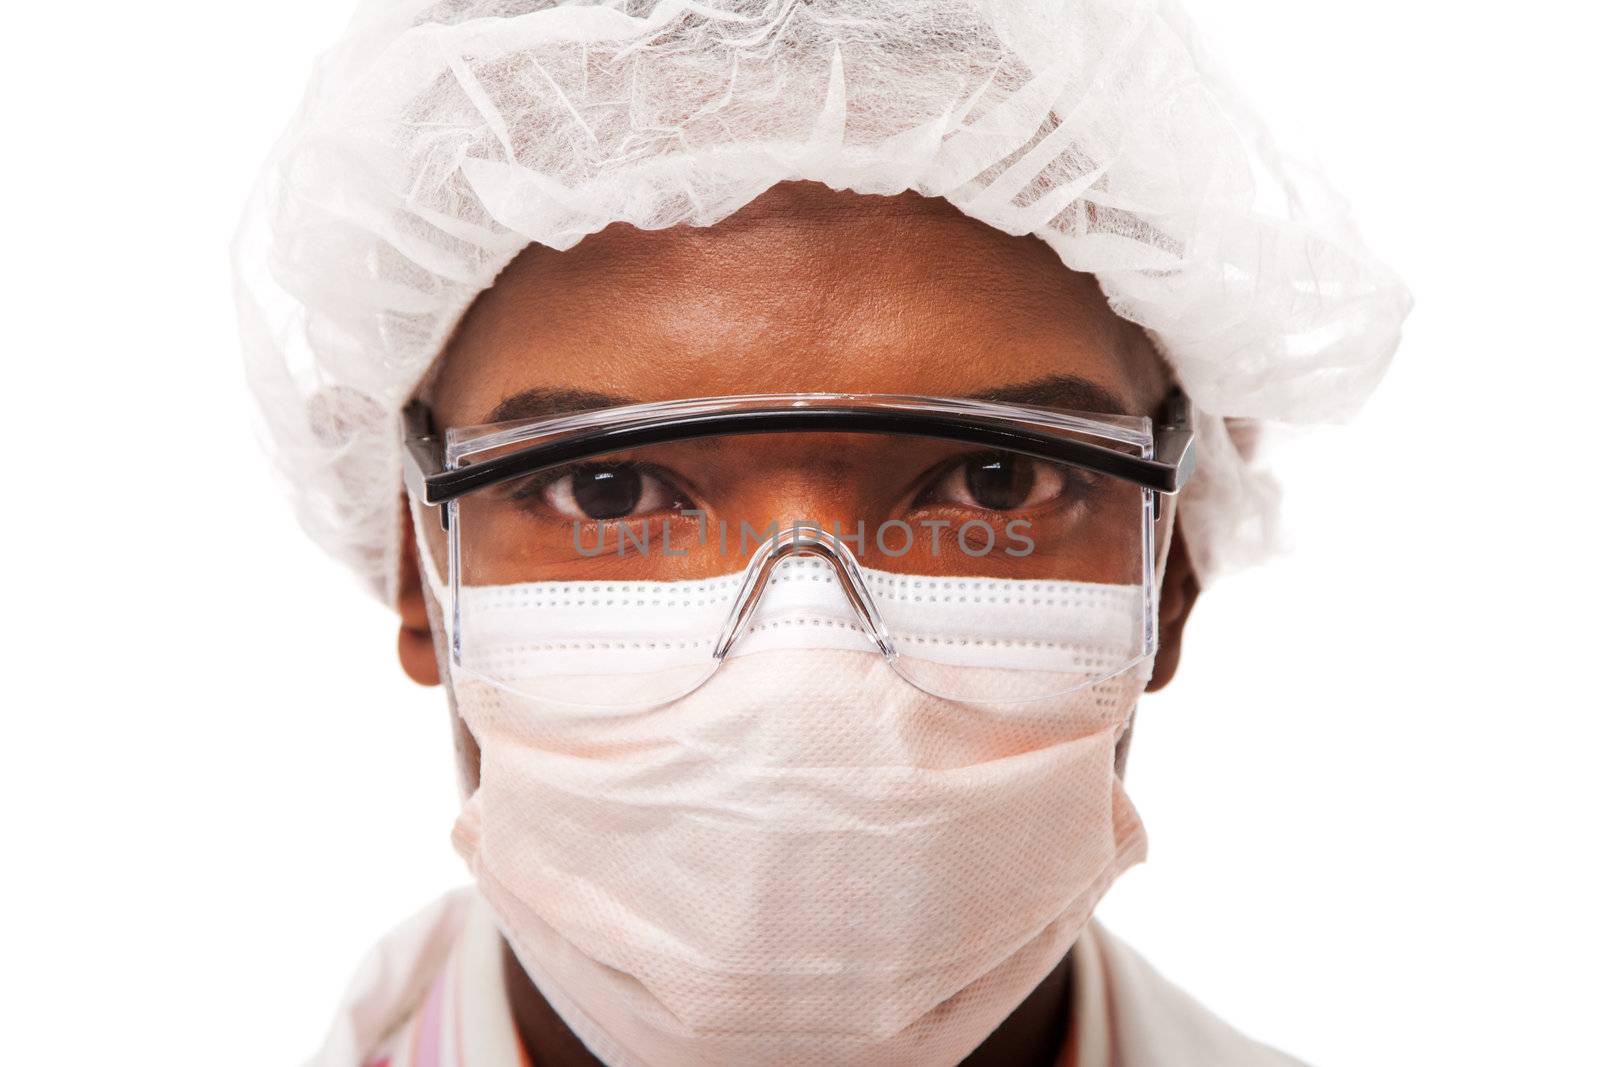 Portrait face of a handsome man dressed as doctor physician scientist surgeon or working in the food industry, with mouth and hair cap for hygiene, isolated.